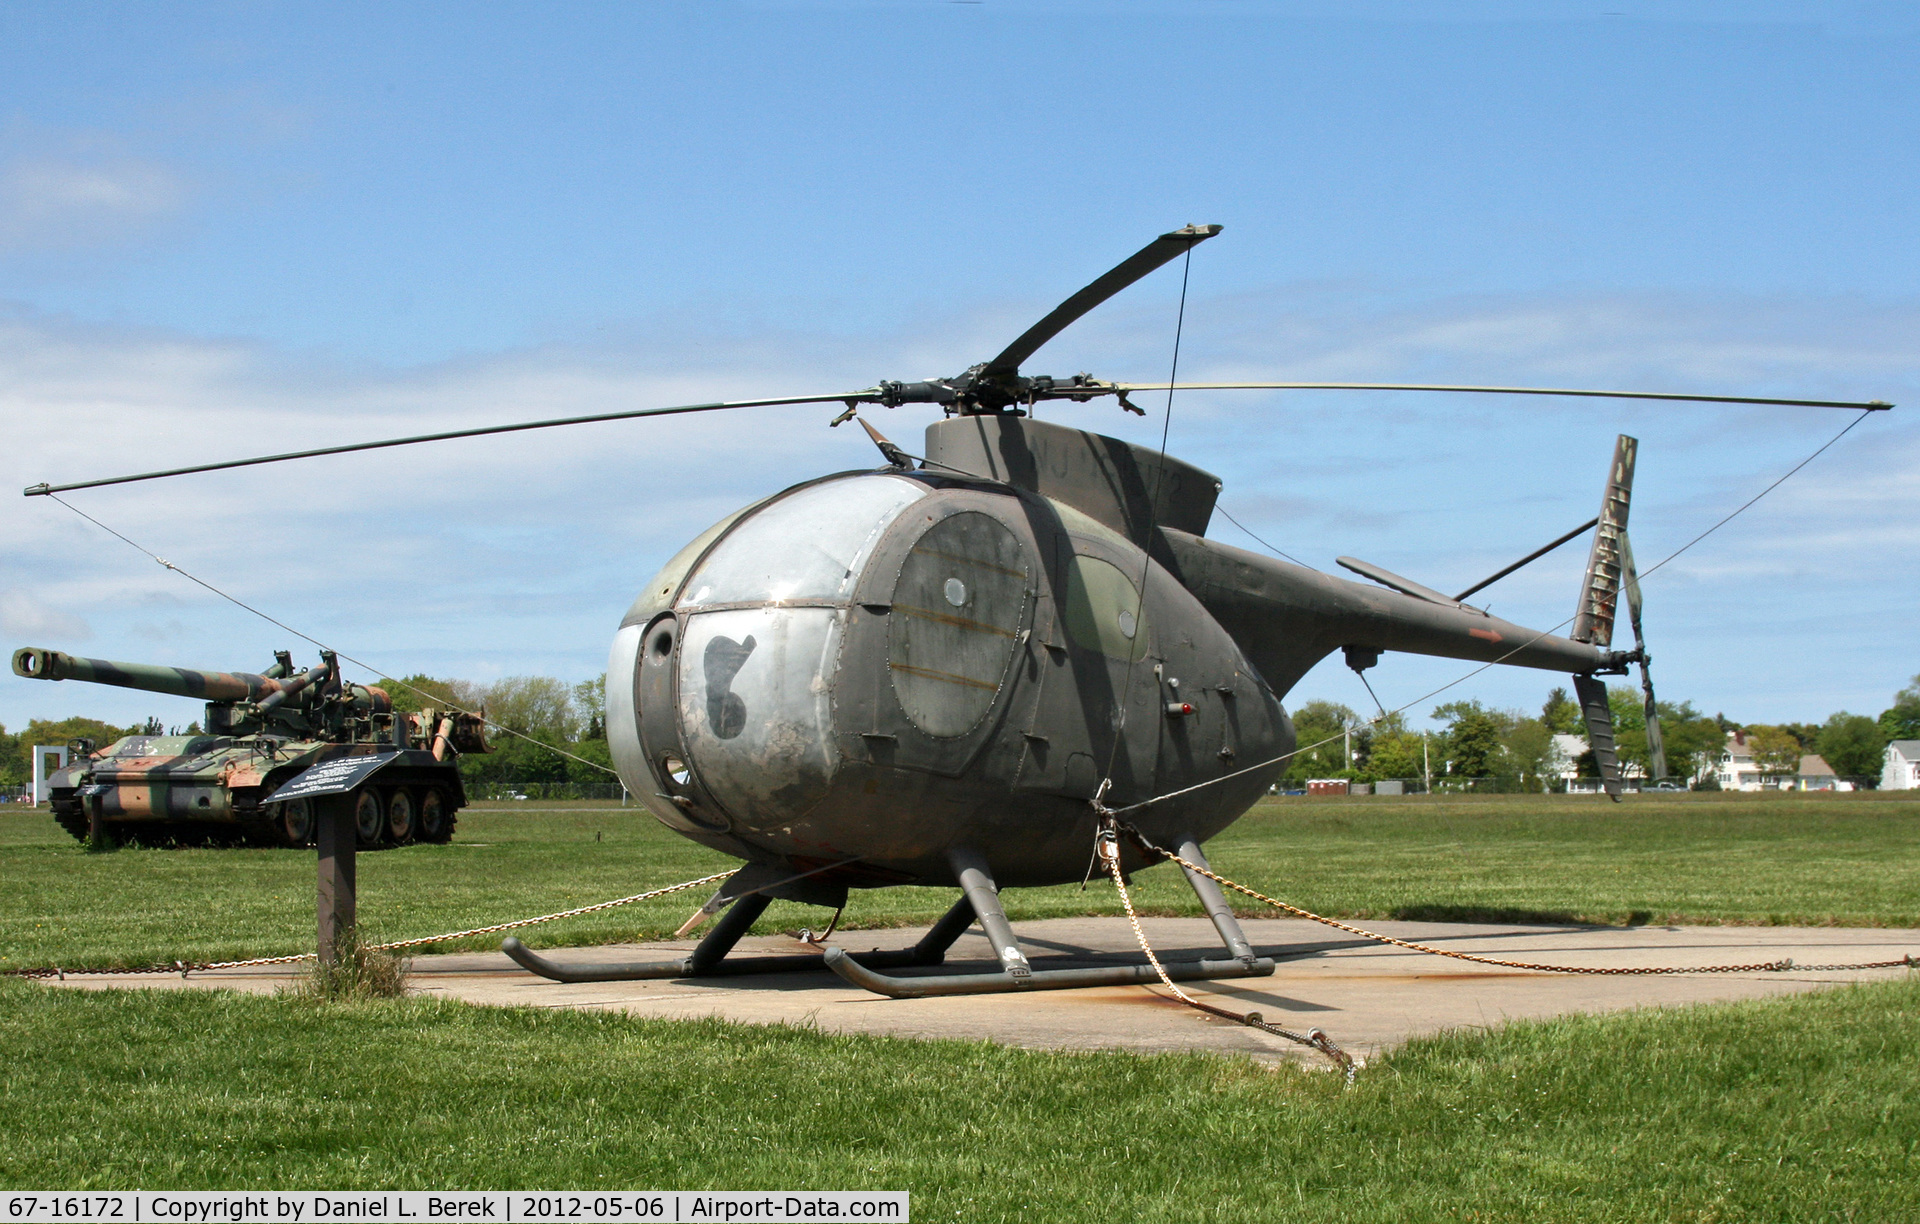 67-16172, 1967 Hughes OH-6A Cayuse C/N 0557, This helicopter is now on display at the National Guard Militia Museum of New Jersey, Sea Girt.